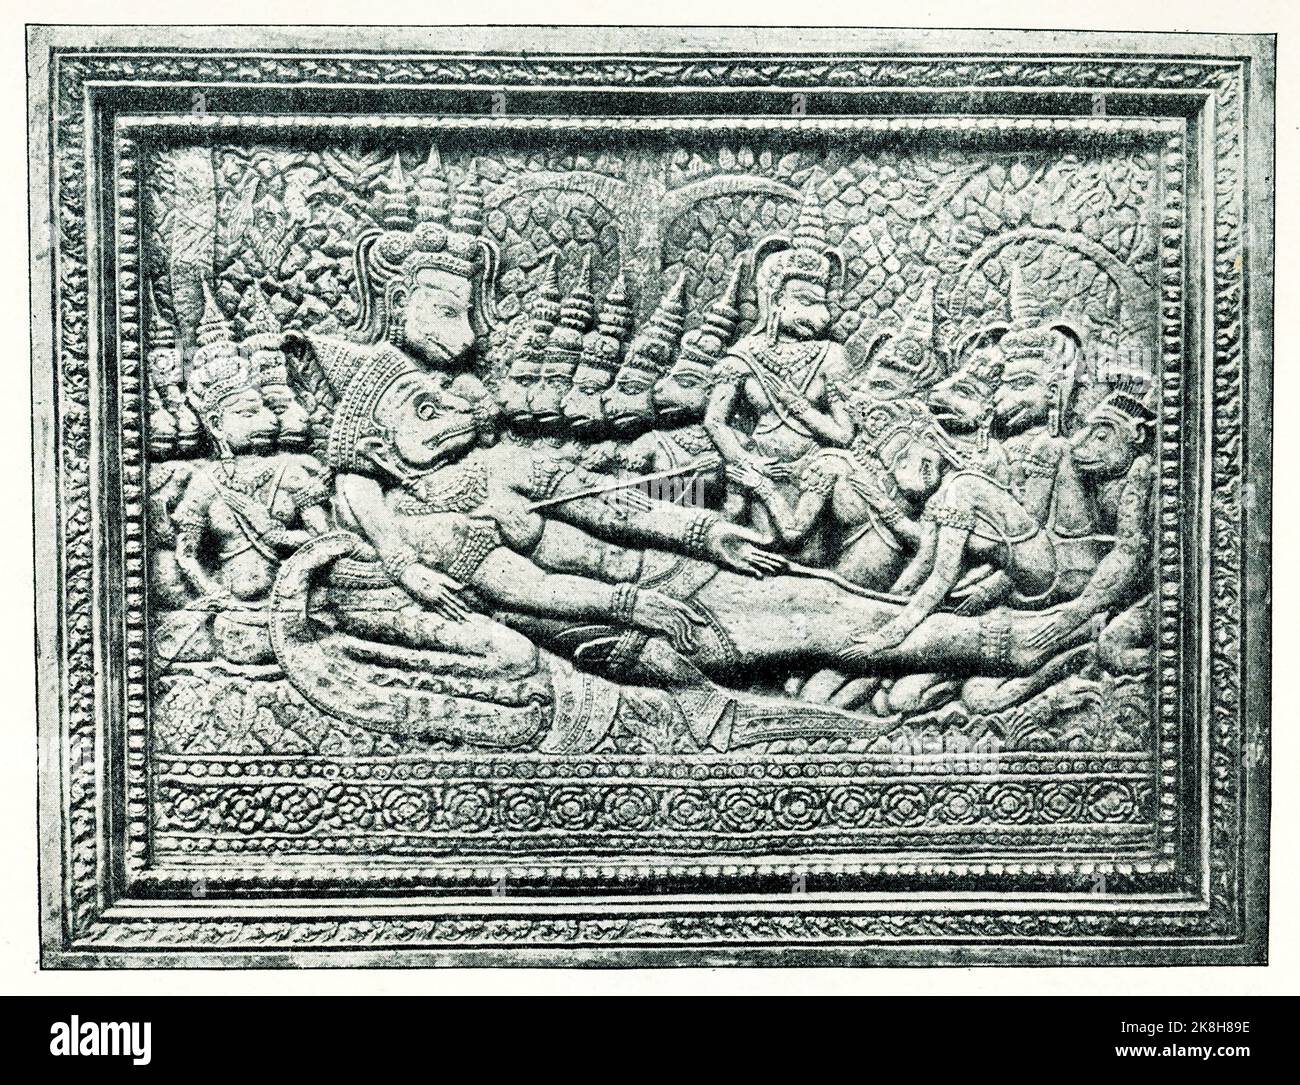 The 1910 caption for this image reads: 'The Death of the Asian god Hanuman. A presentation from the Ramayana.   A relief from the Temple at Angkor Wat in Cambodia.' Hanuman is a Hindu god and a divine vanara companion of the god Rama. Hanuman is one of the central characters of the Hindu epic Ramayana. The Ramayana is an ancient Sanskrit epic which follows Prince Rama's quest to rescue his beloved wife Sita from the clutches of Ravana with the help of an army of monkeys. It is traditionally attributed to the authorship of the sage Valmiki and dated to around 500 BC to 100 BC Stock Photo